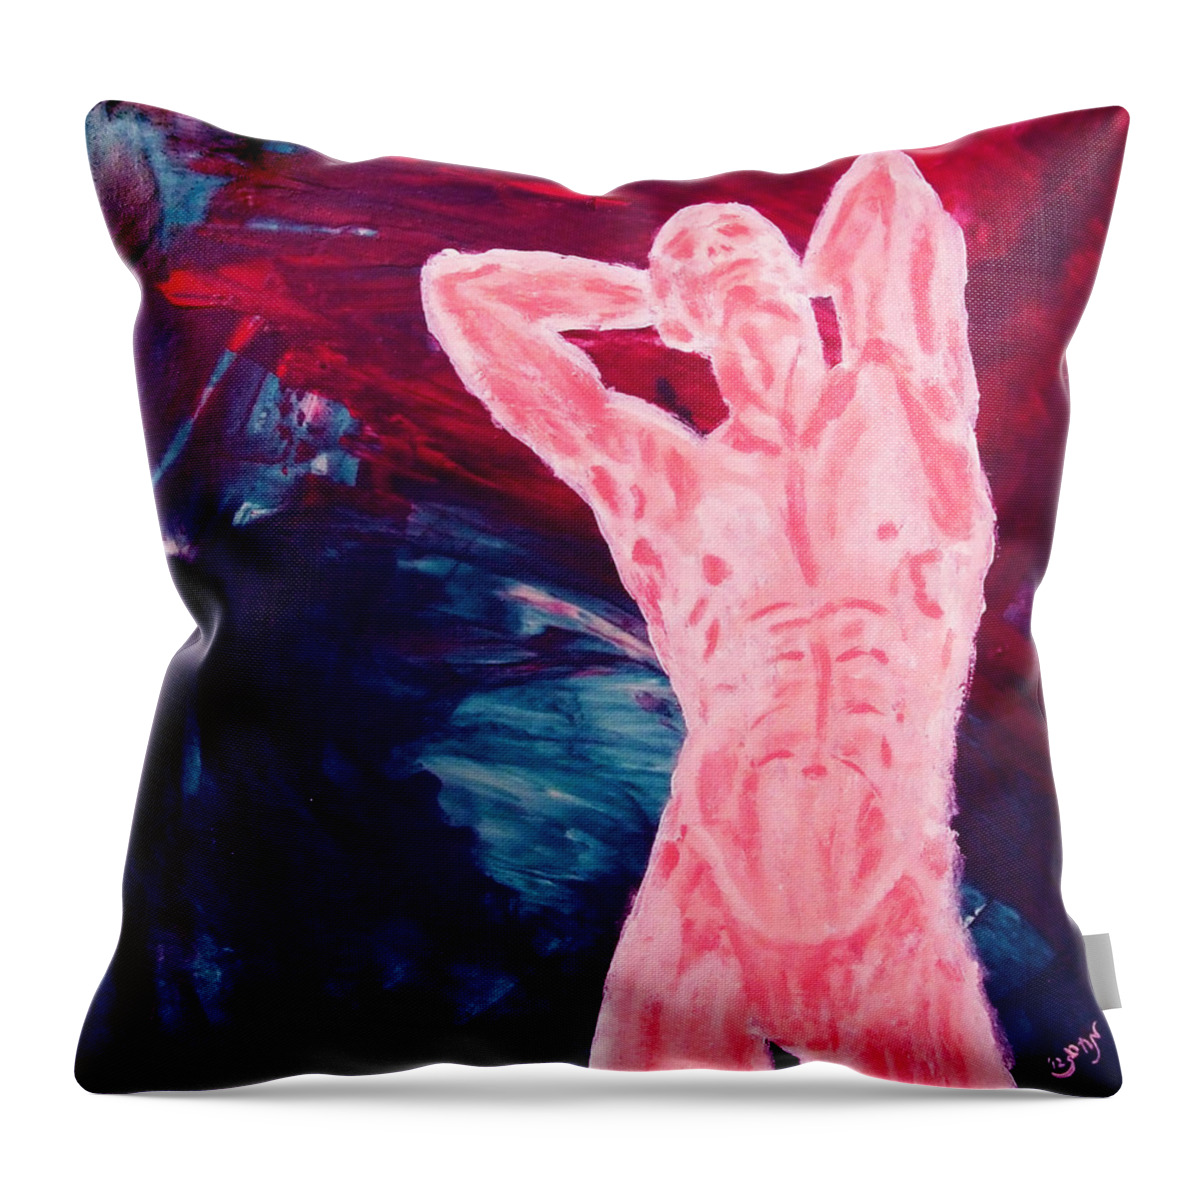 Pink Throw Pillow featuring the painting Pink Transgender Male Nude Figure on Blue Green Red Chaotic Background of Transformation and Change by MendyZ M Zimmerman